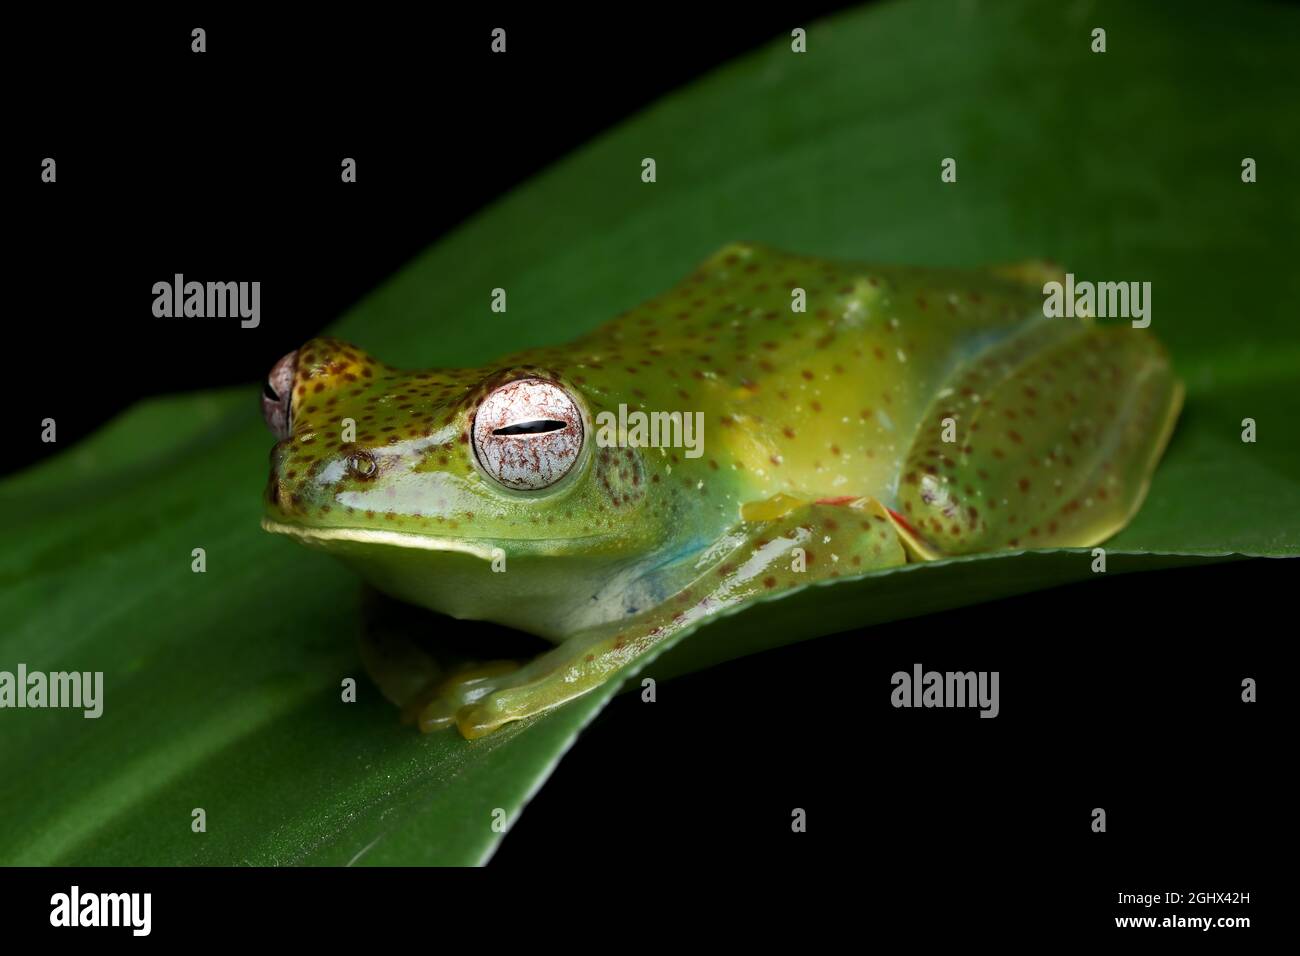 Malayan tree frog on a leaf, Indonesia Stock Photo